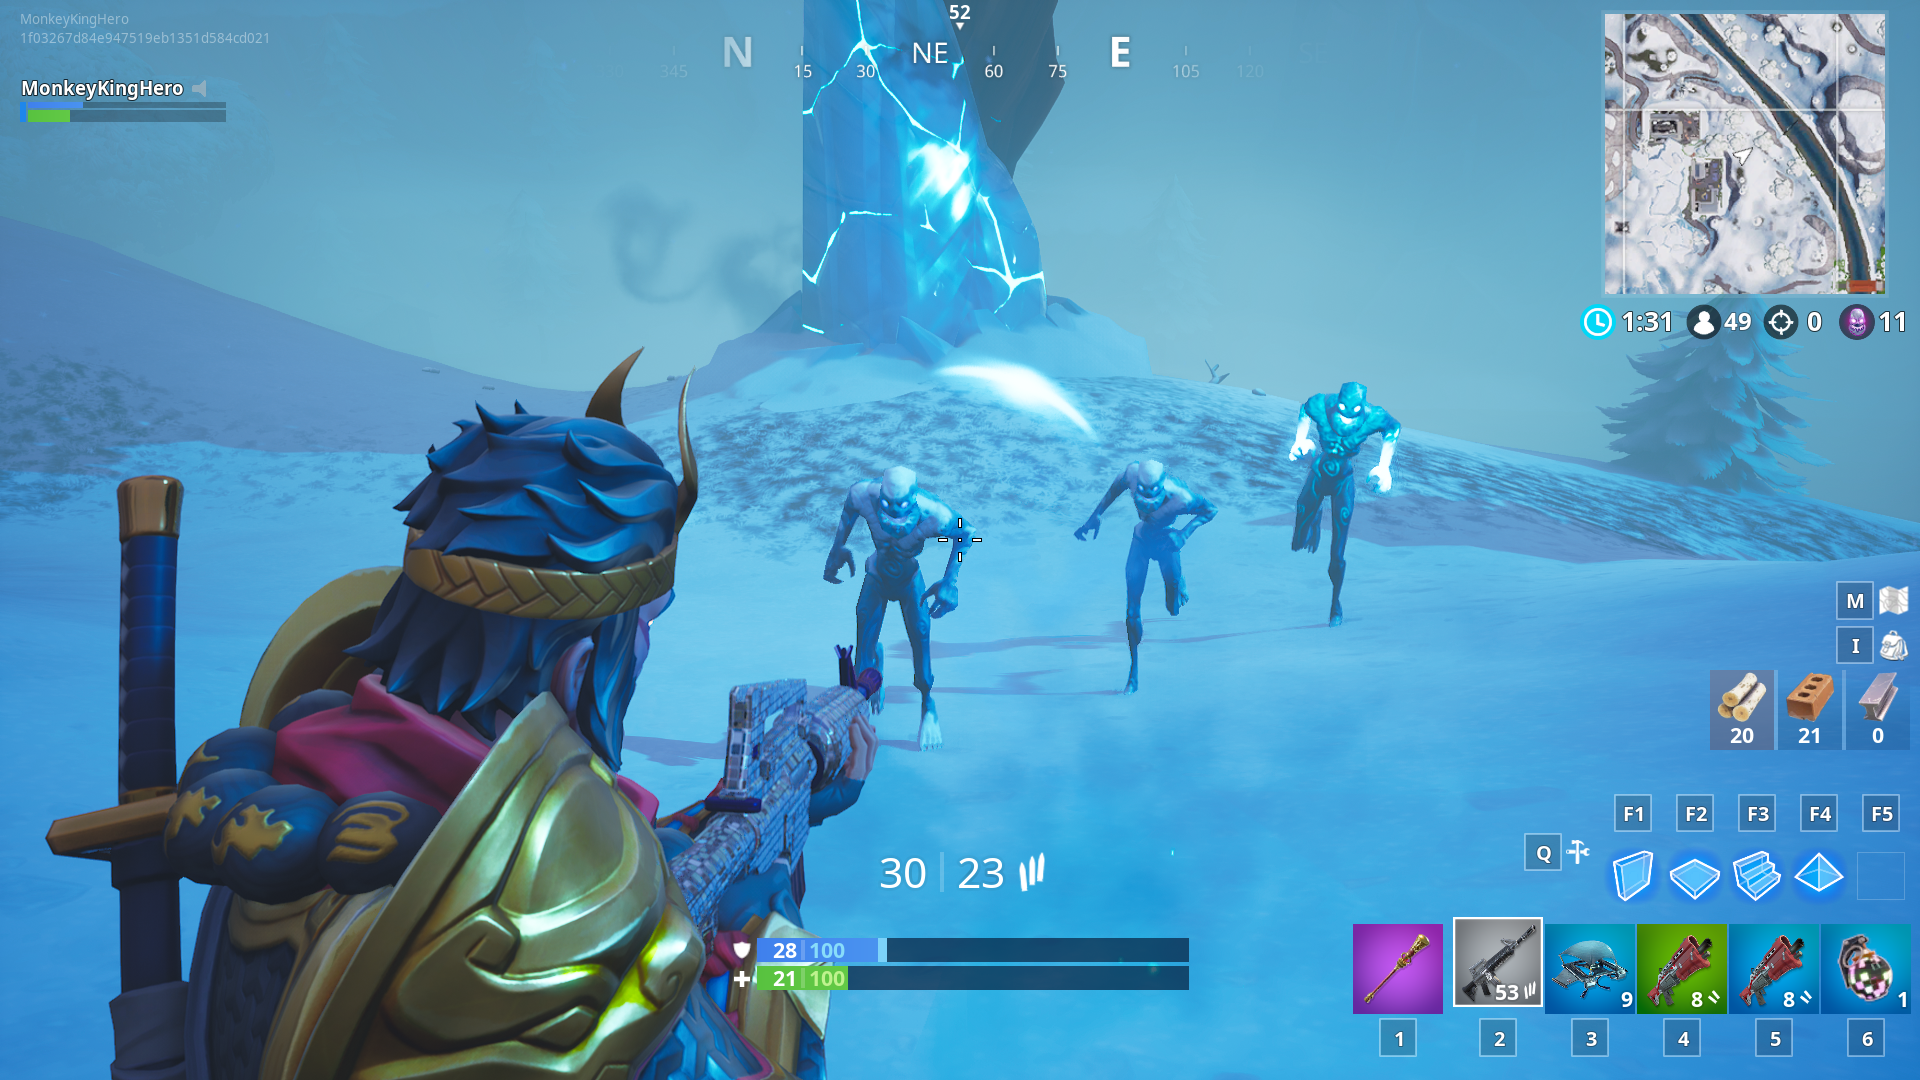 How To Complete The Destroy Ice Fiends Ice Storm Fortnite - how to complete the destroy ice fiends ice storm fortnite challenge